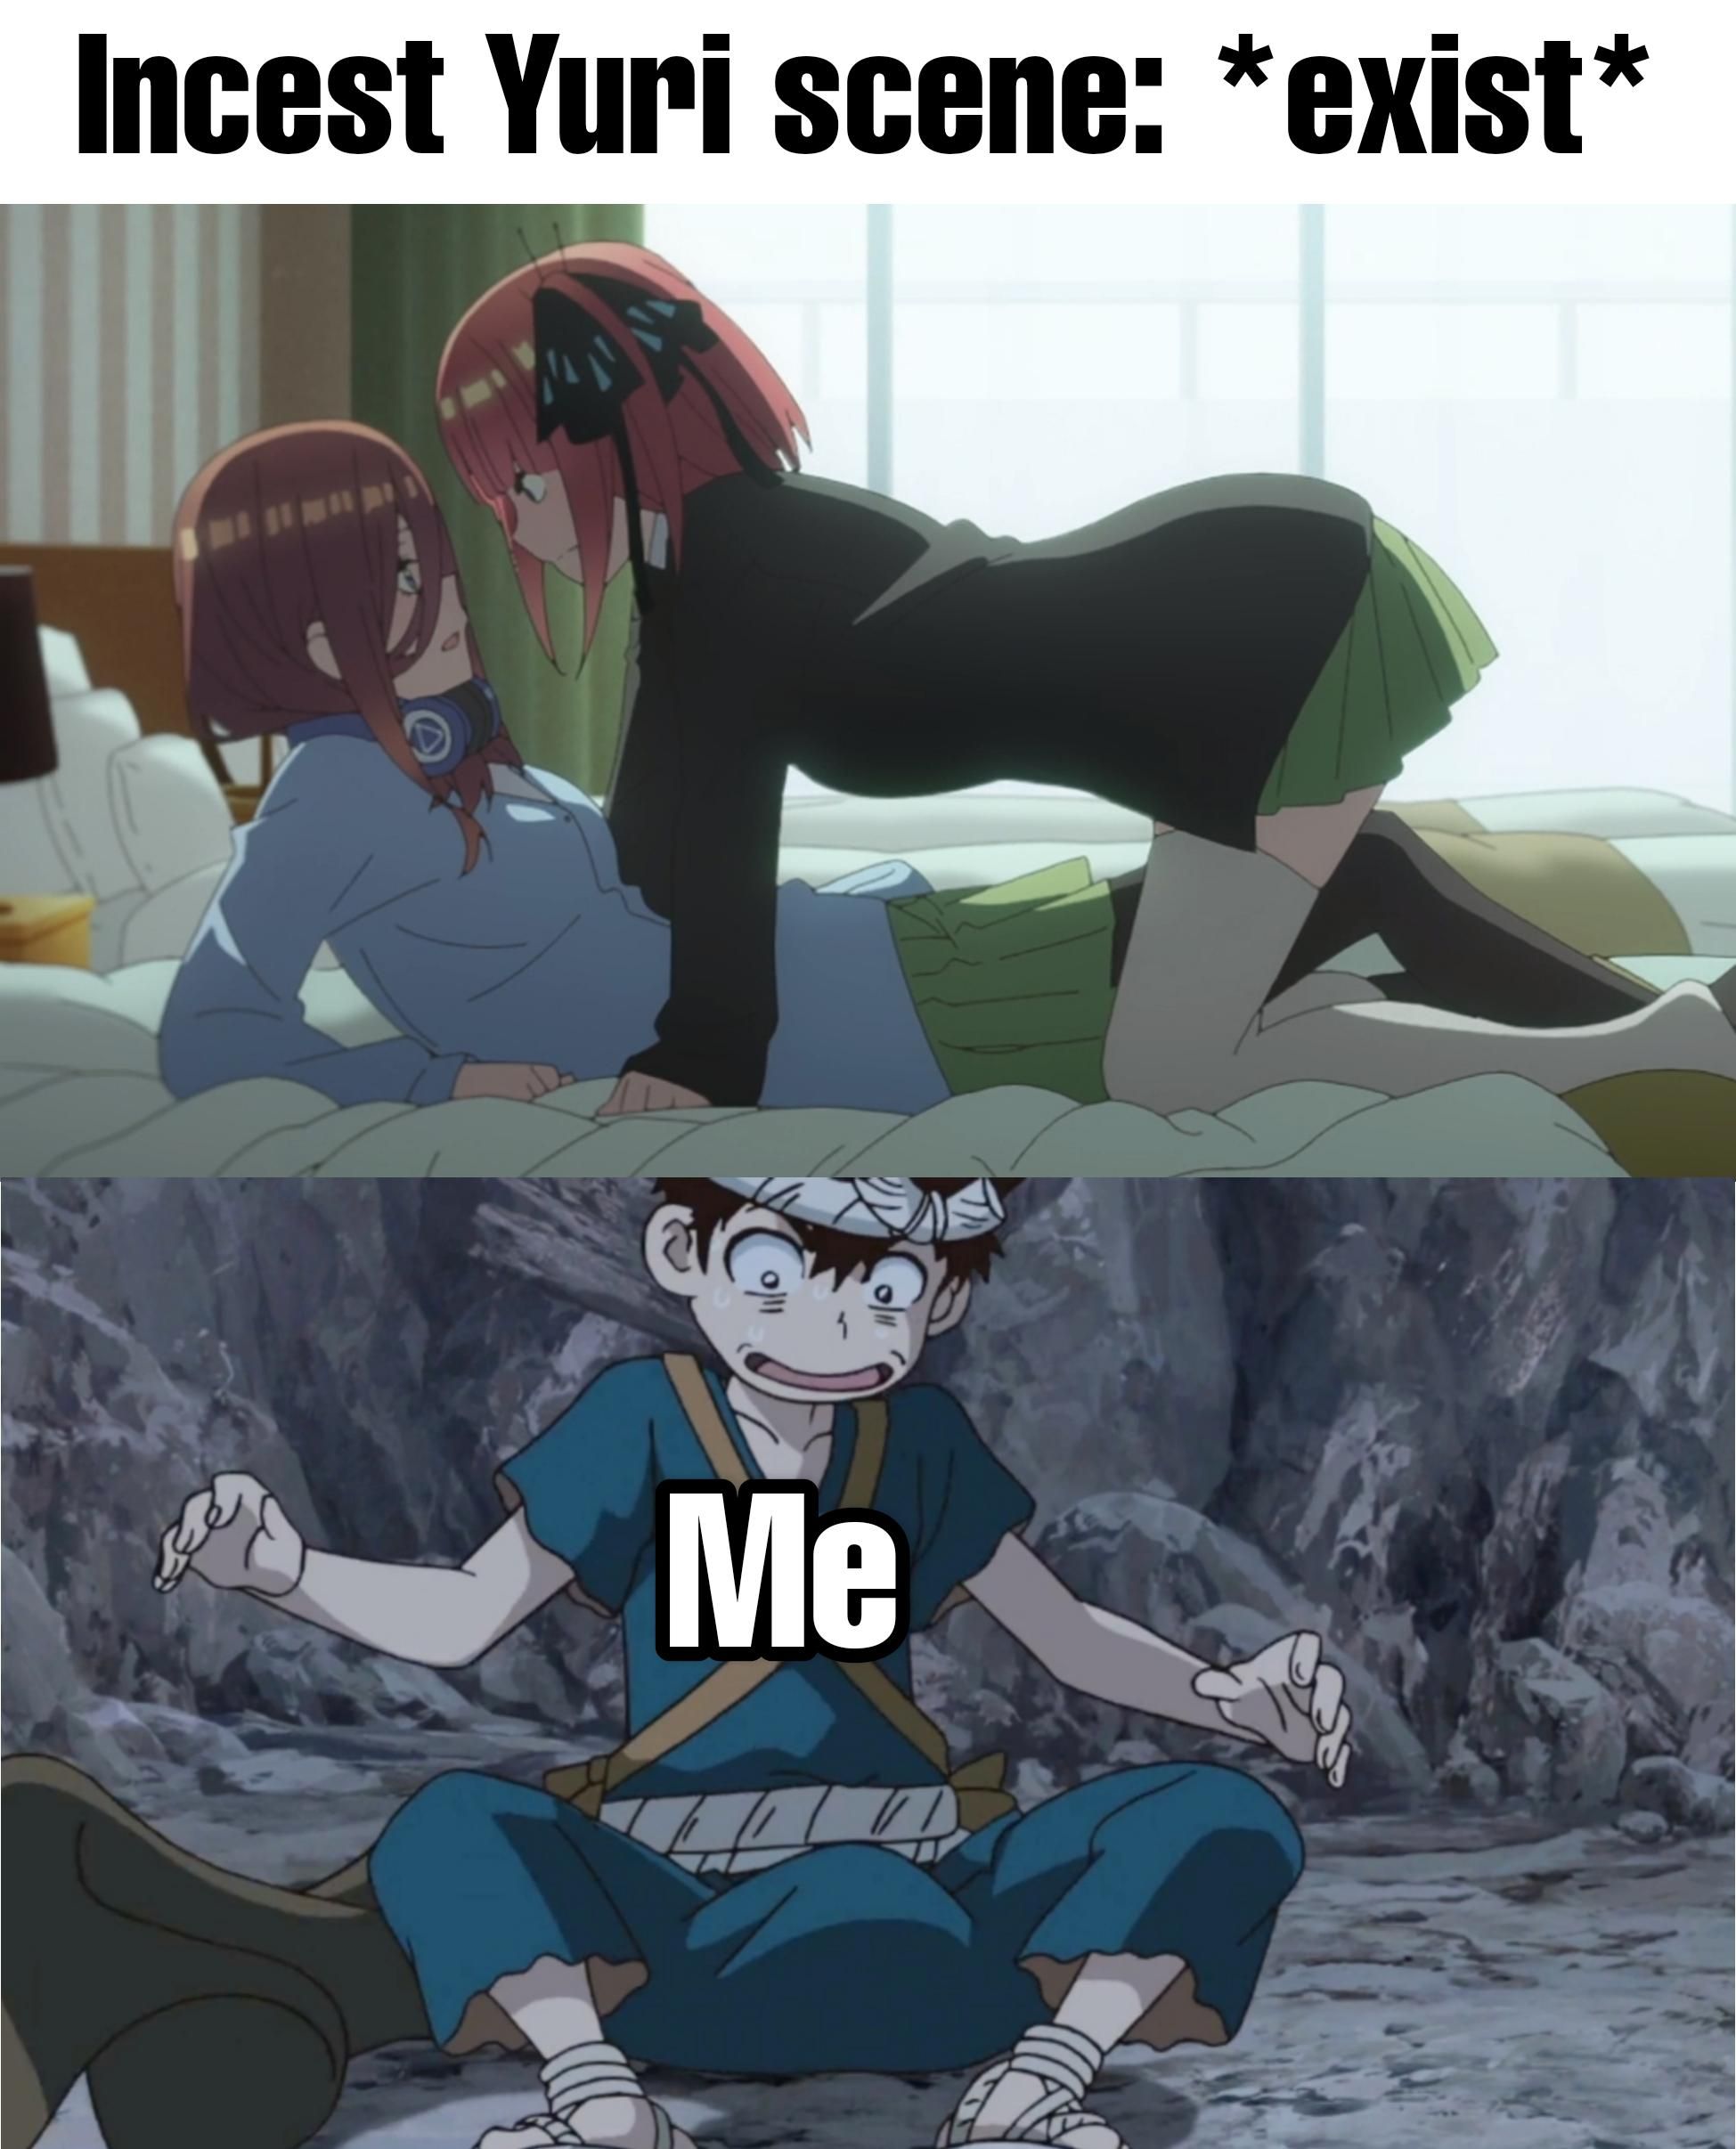 Can't wait for Senku to reinvent Hentai